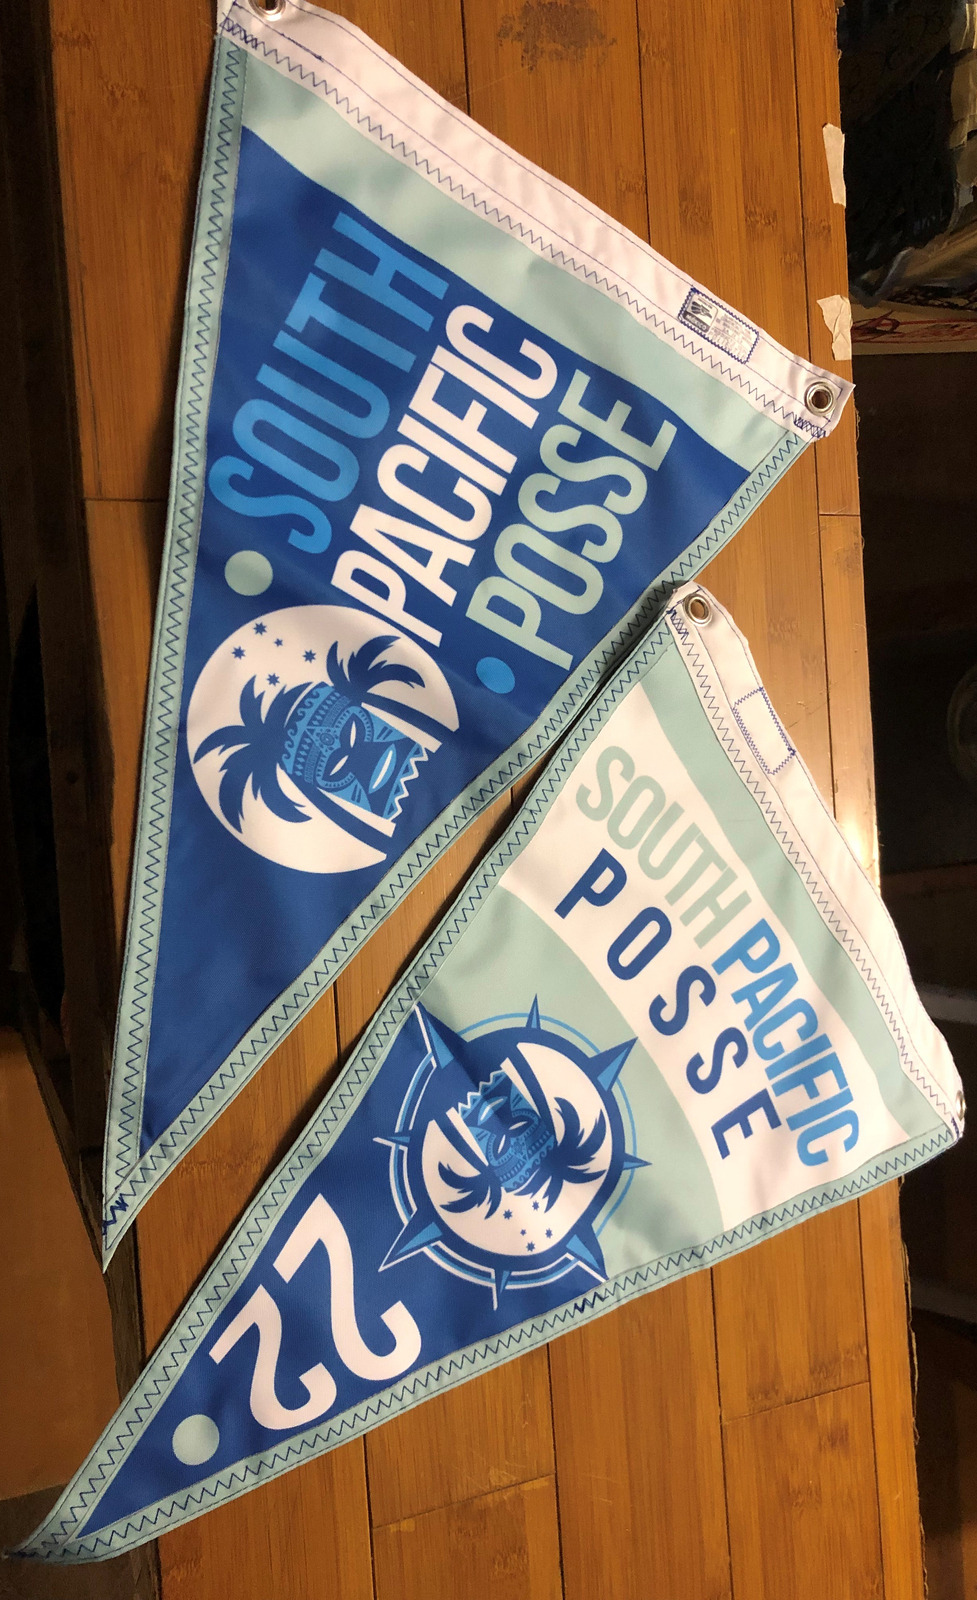 South Pacific Posse burgees - Avail for Pickup in Nuku Hiva French Polynesia or Shelter Bay Panama https://pacificposse.com